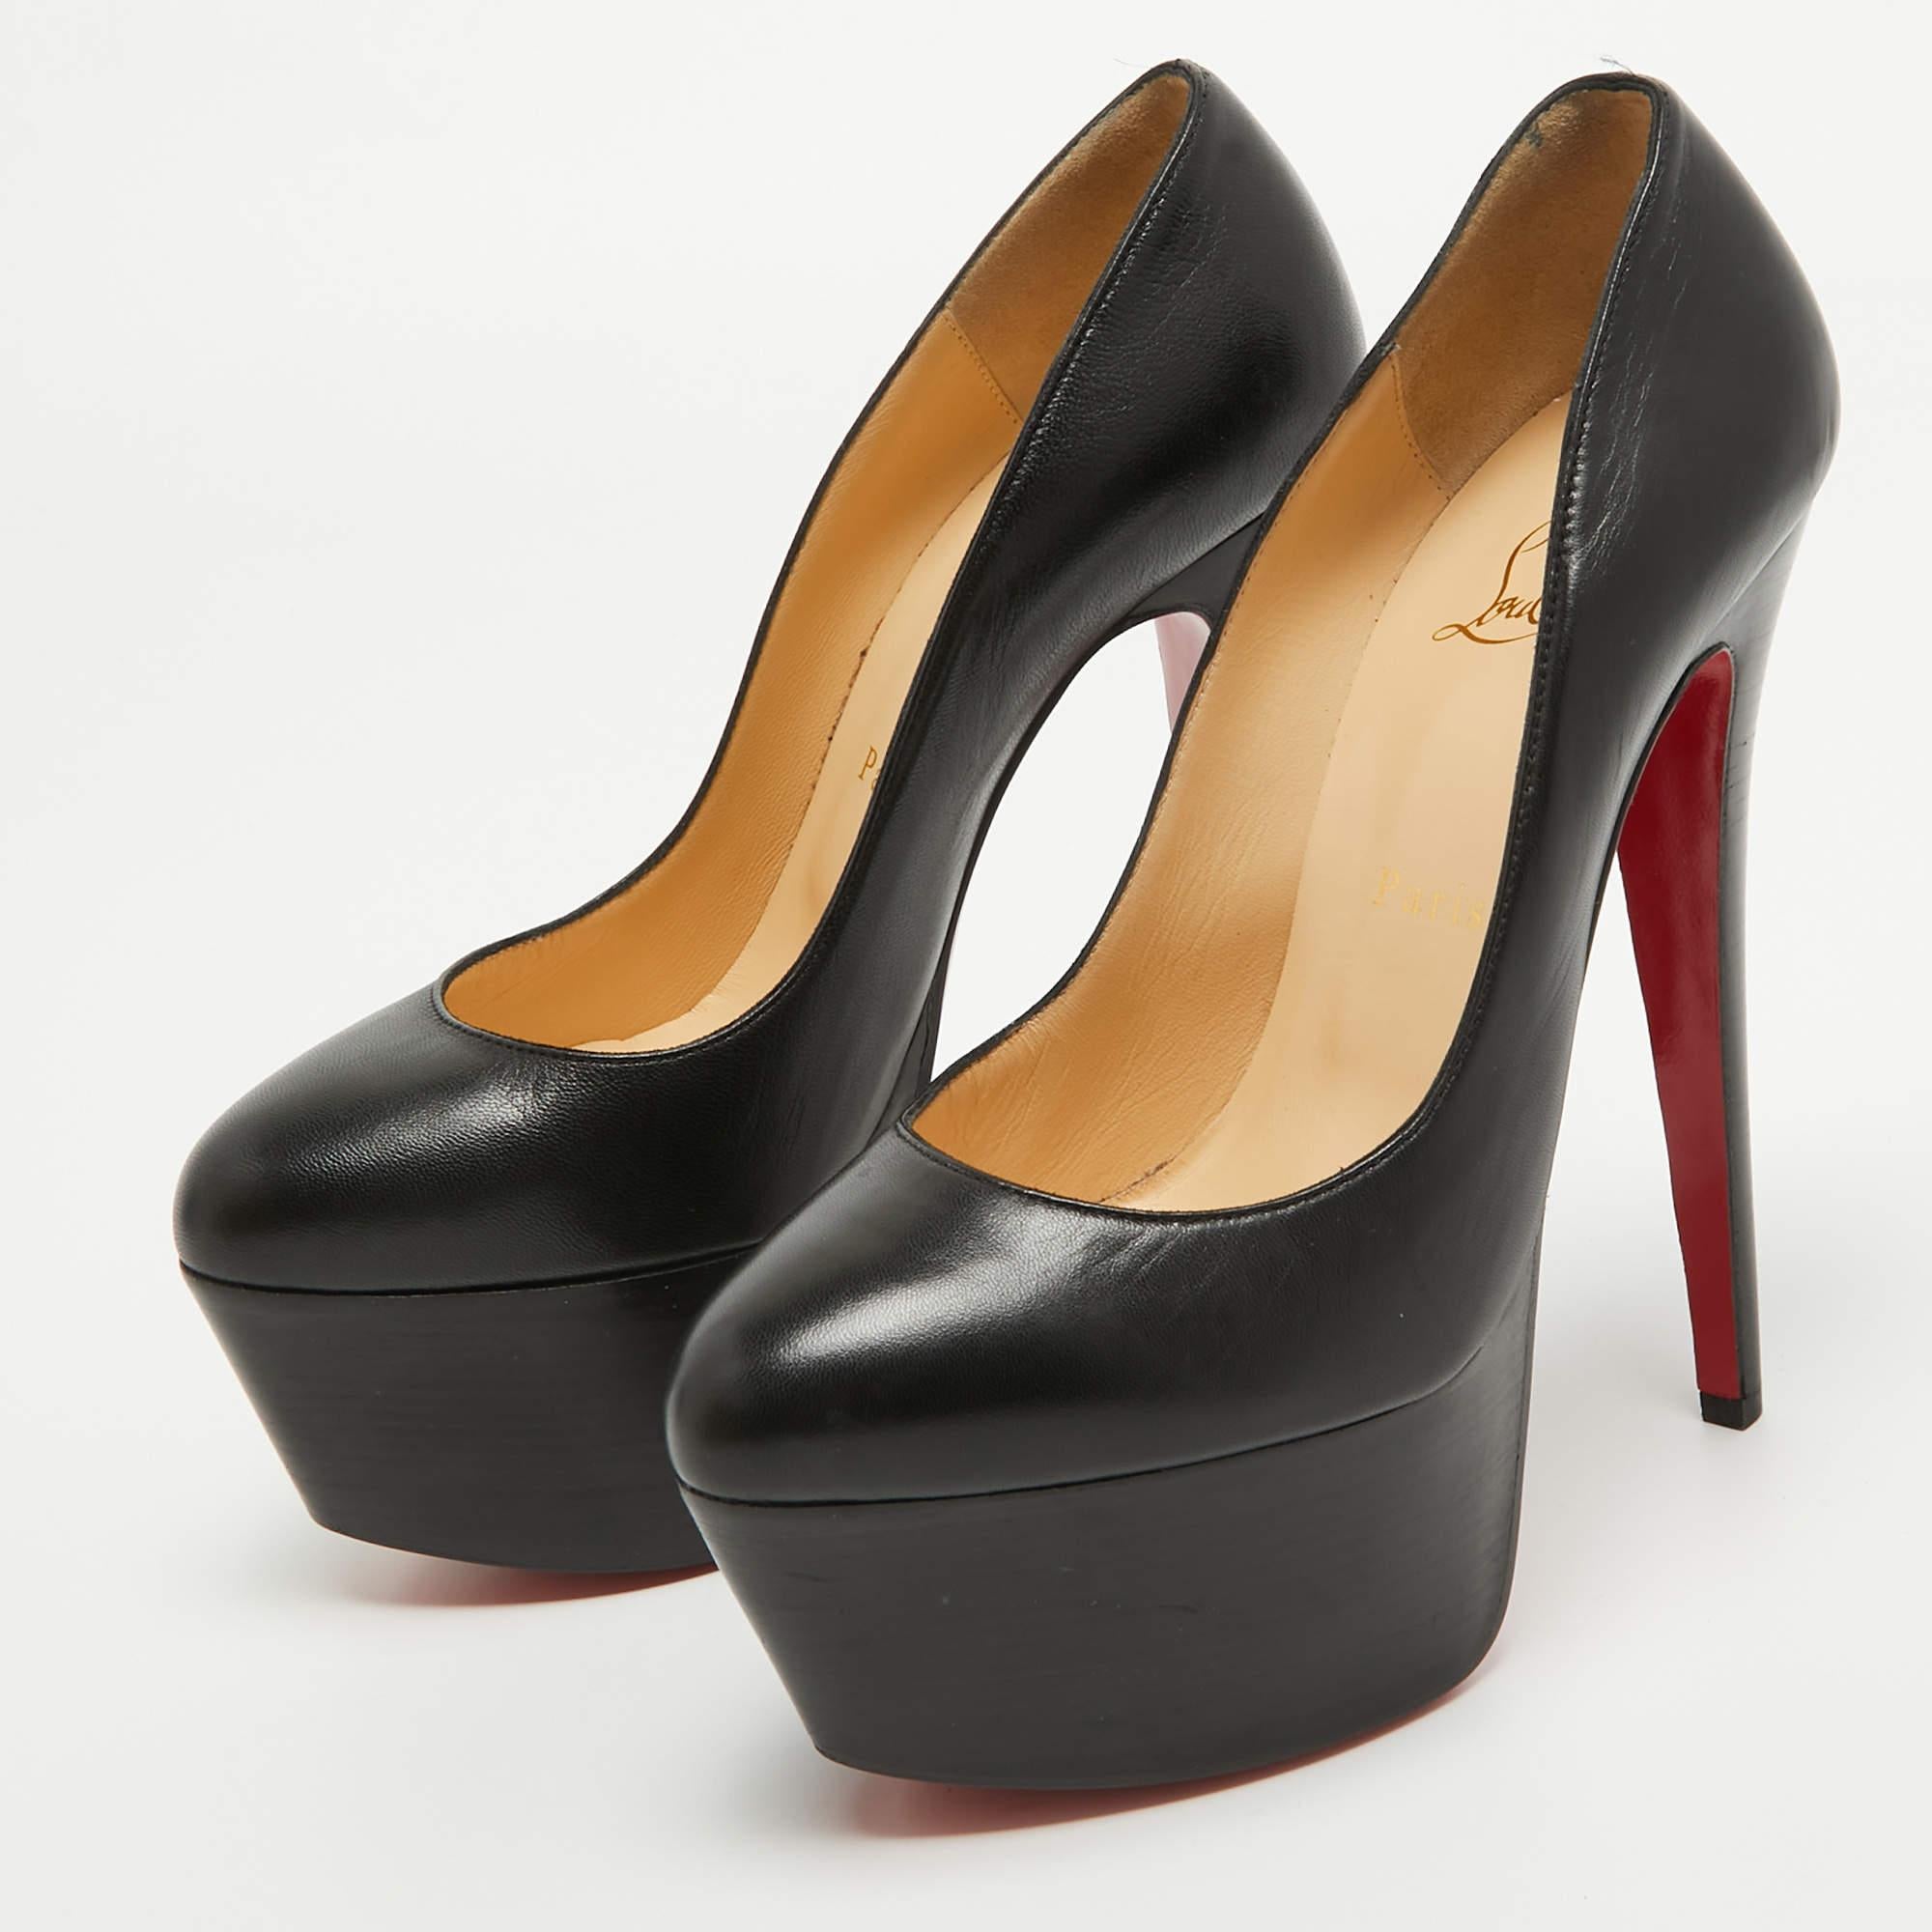 These pumps from Christian Louboutin are meant to be a loved choice. Wonderfully crafted and balanced on sleek heels, the pumps will lift your feet in a stunning silhouette.

Includes: Branded Box